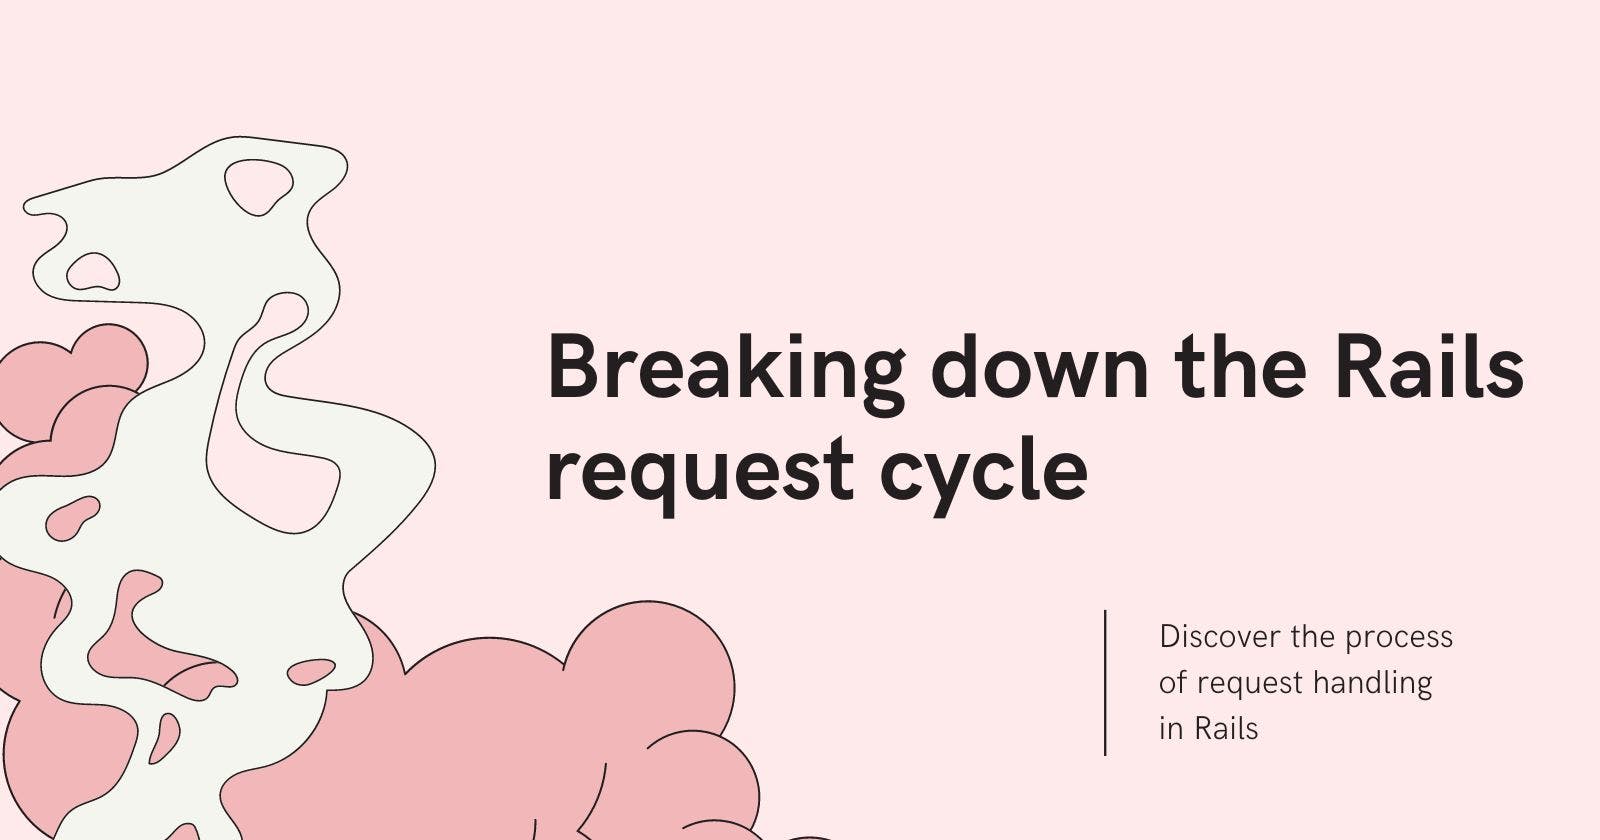 Breaking down the Rails request cycle